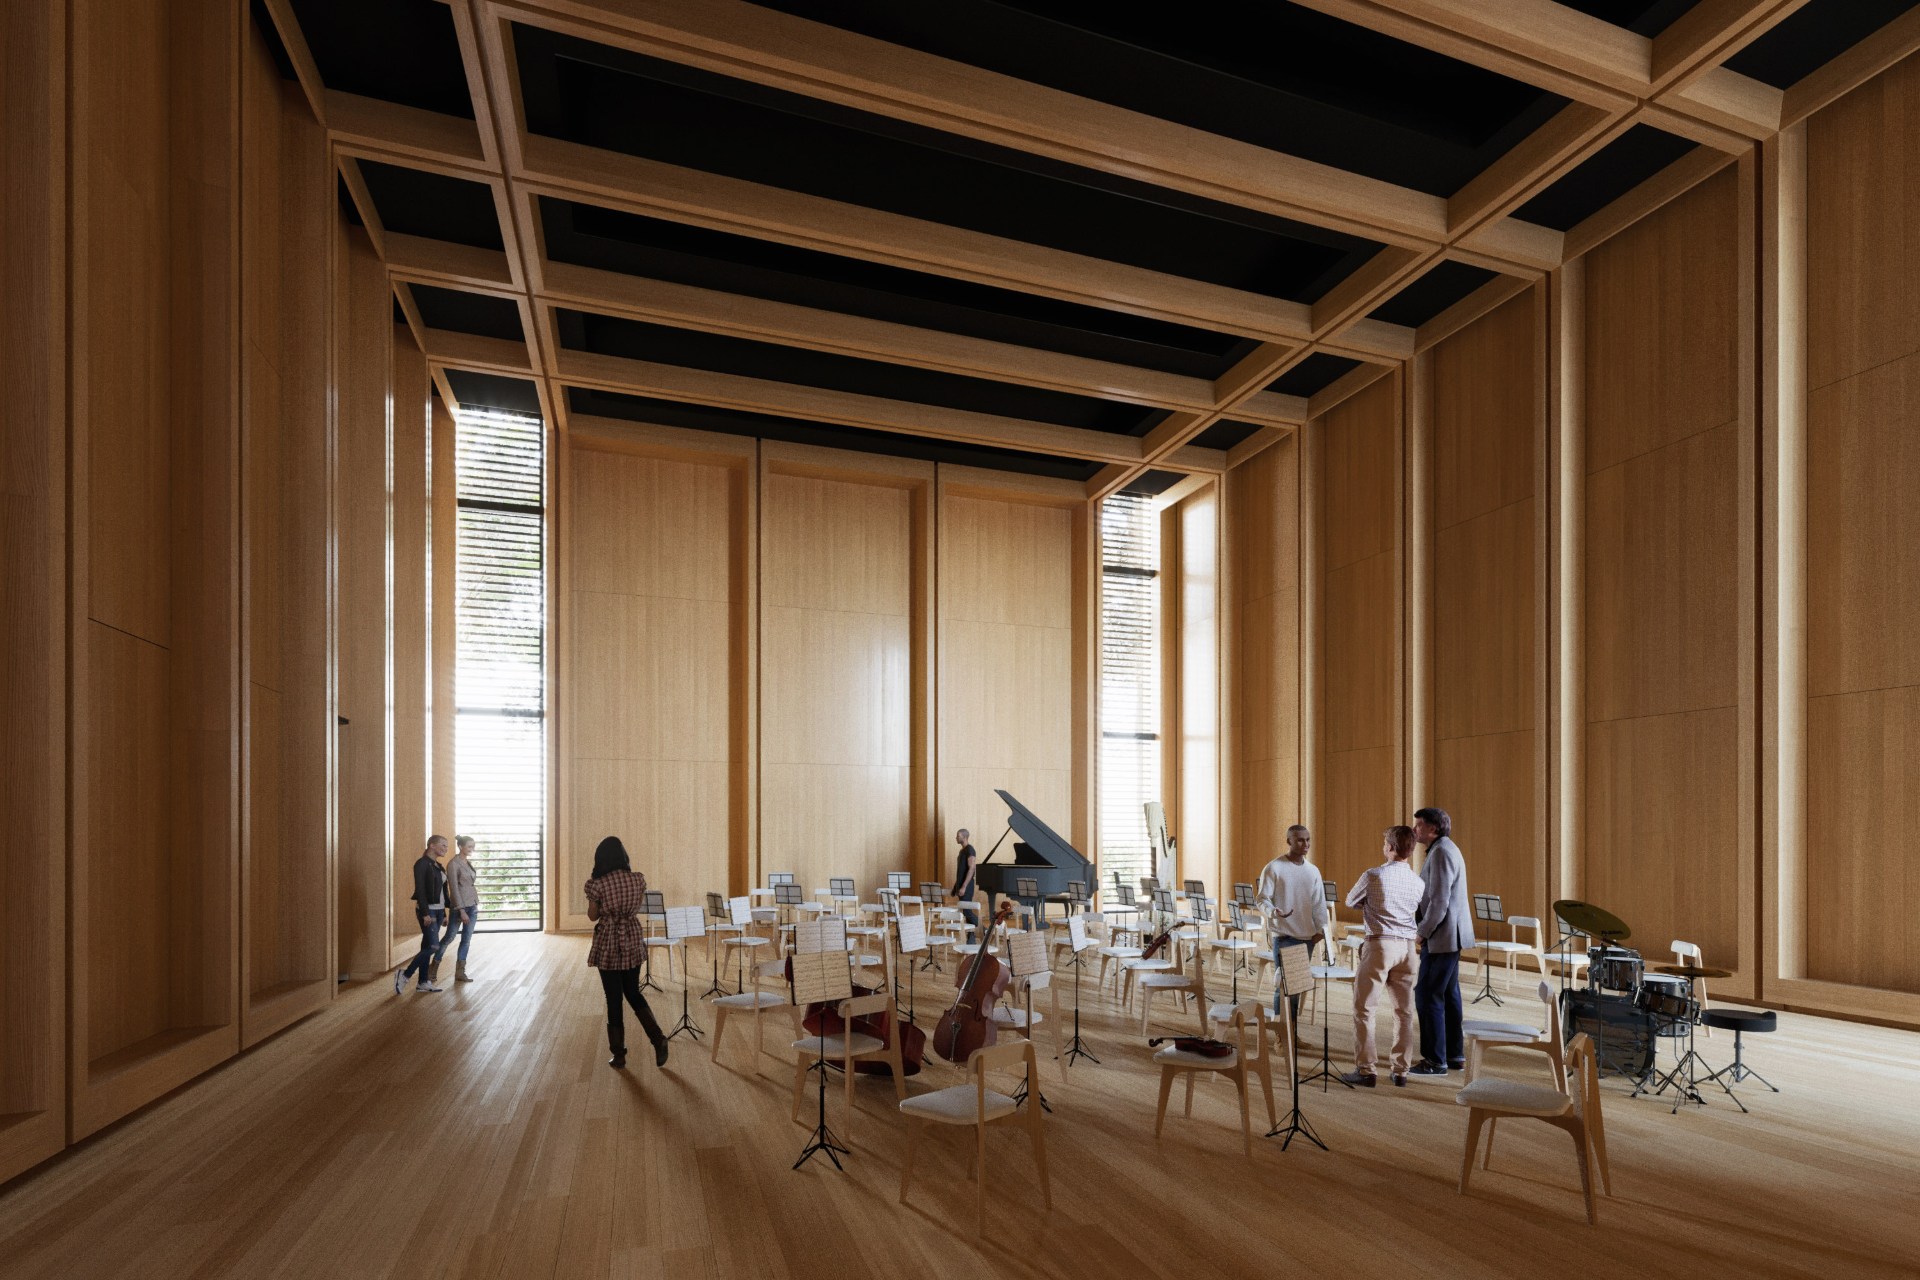 Ancient university gets first music hall in 600 years